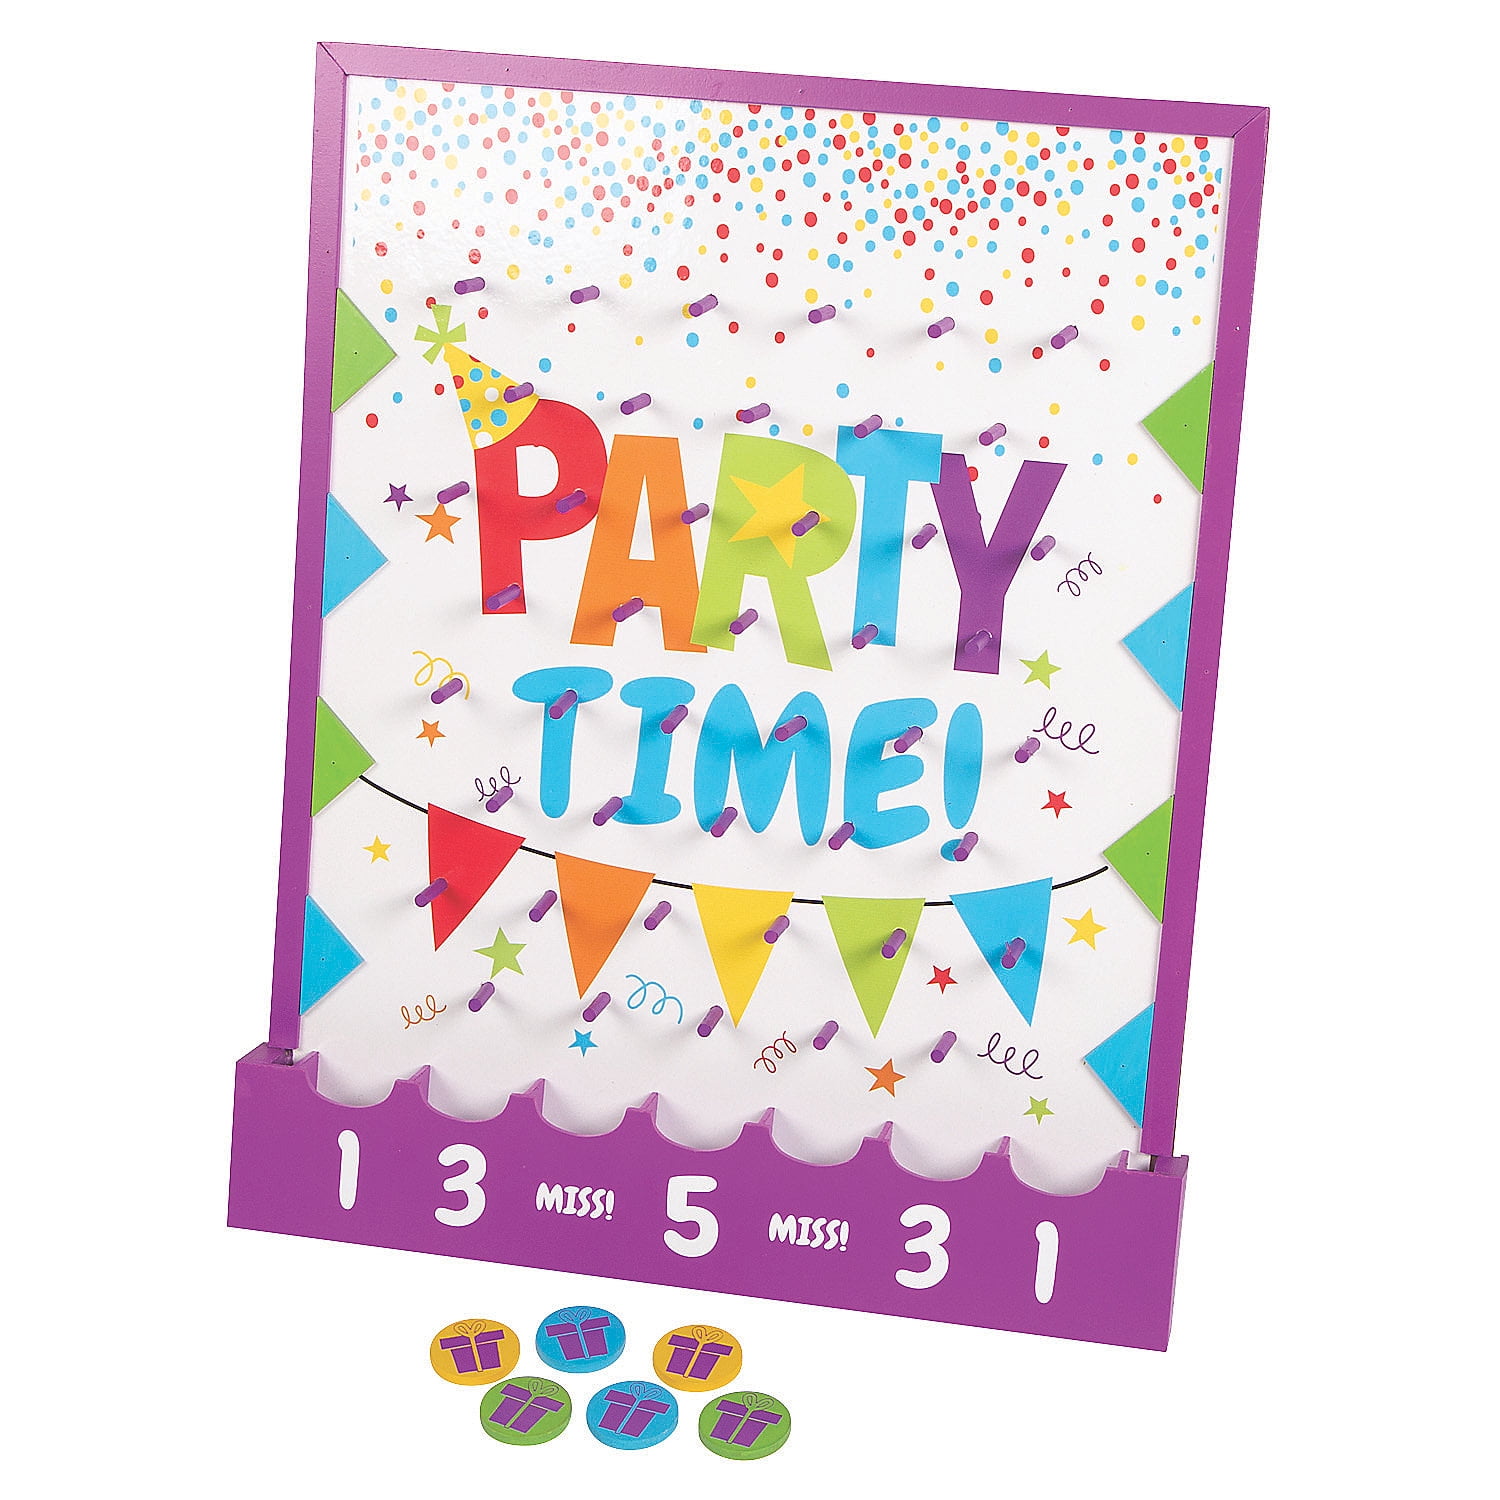 Party Favors - True - Grab and Go Play Pack - 12ct 